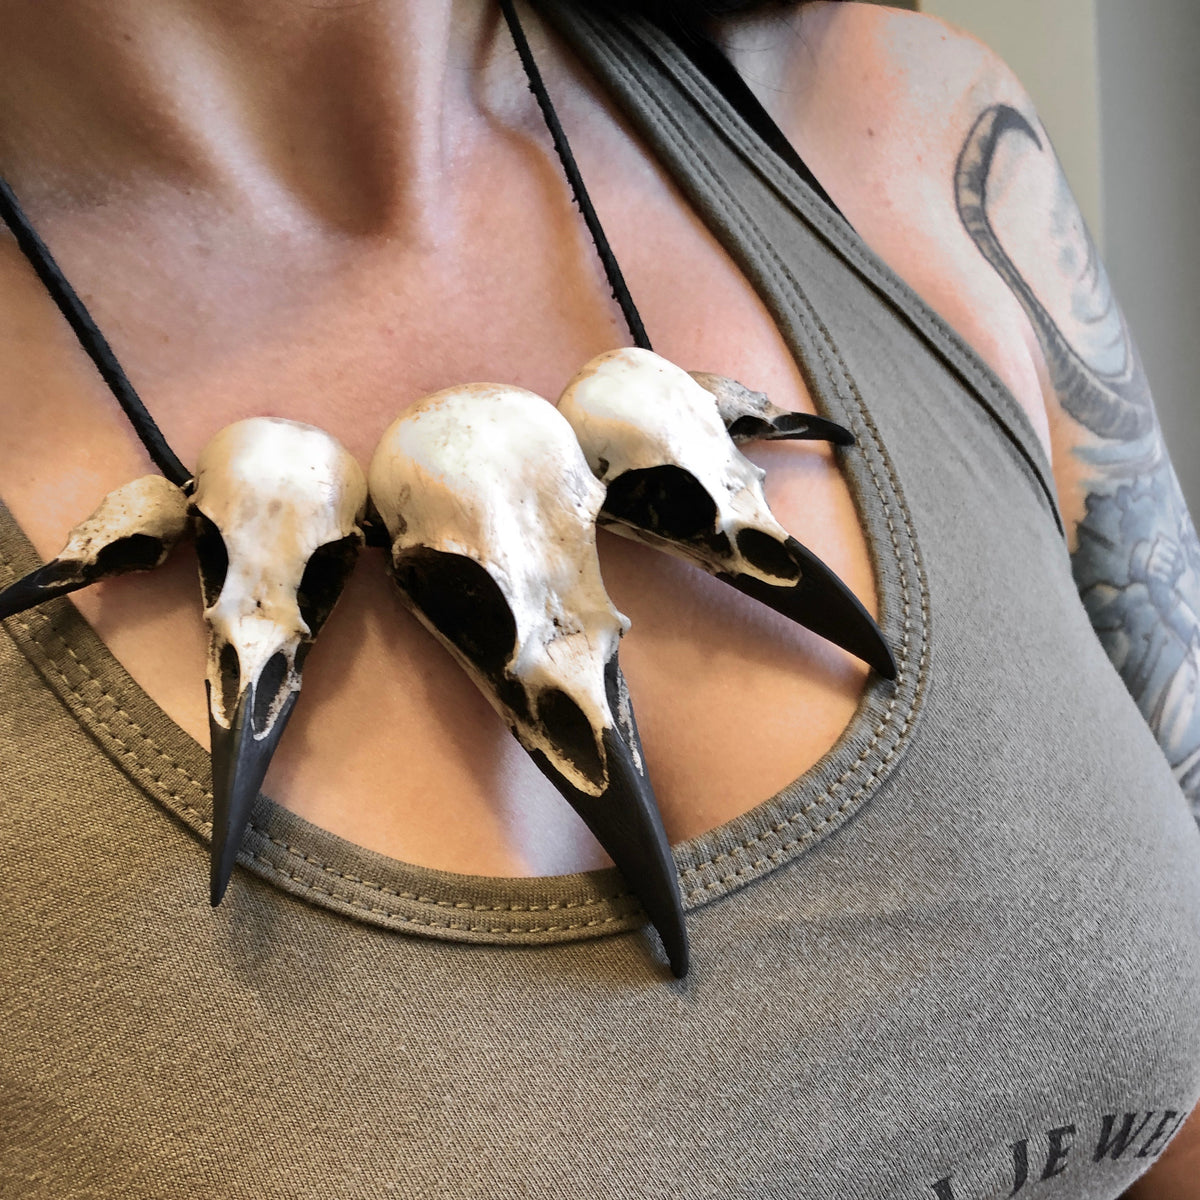 Bone collector bird skull raven skull necklace pendant worn by bone jewelry gothic model with tattoos. The necklace features five skulls.